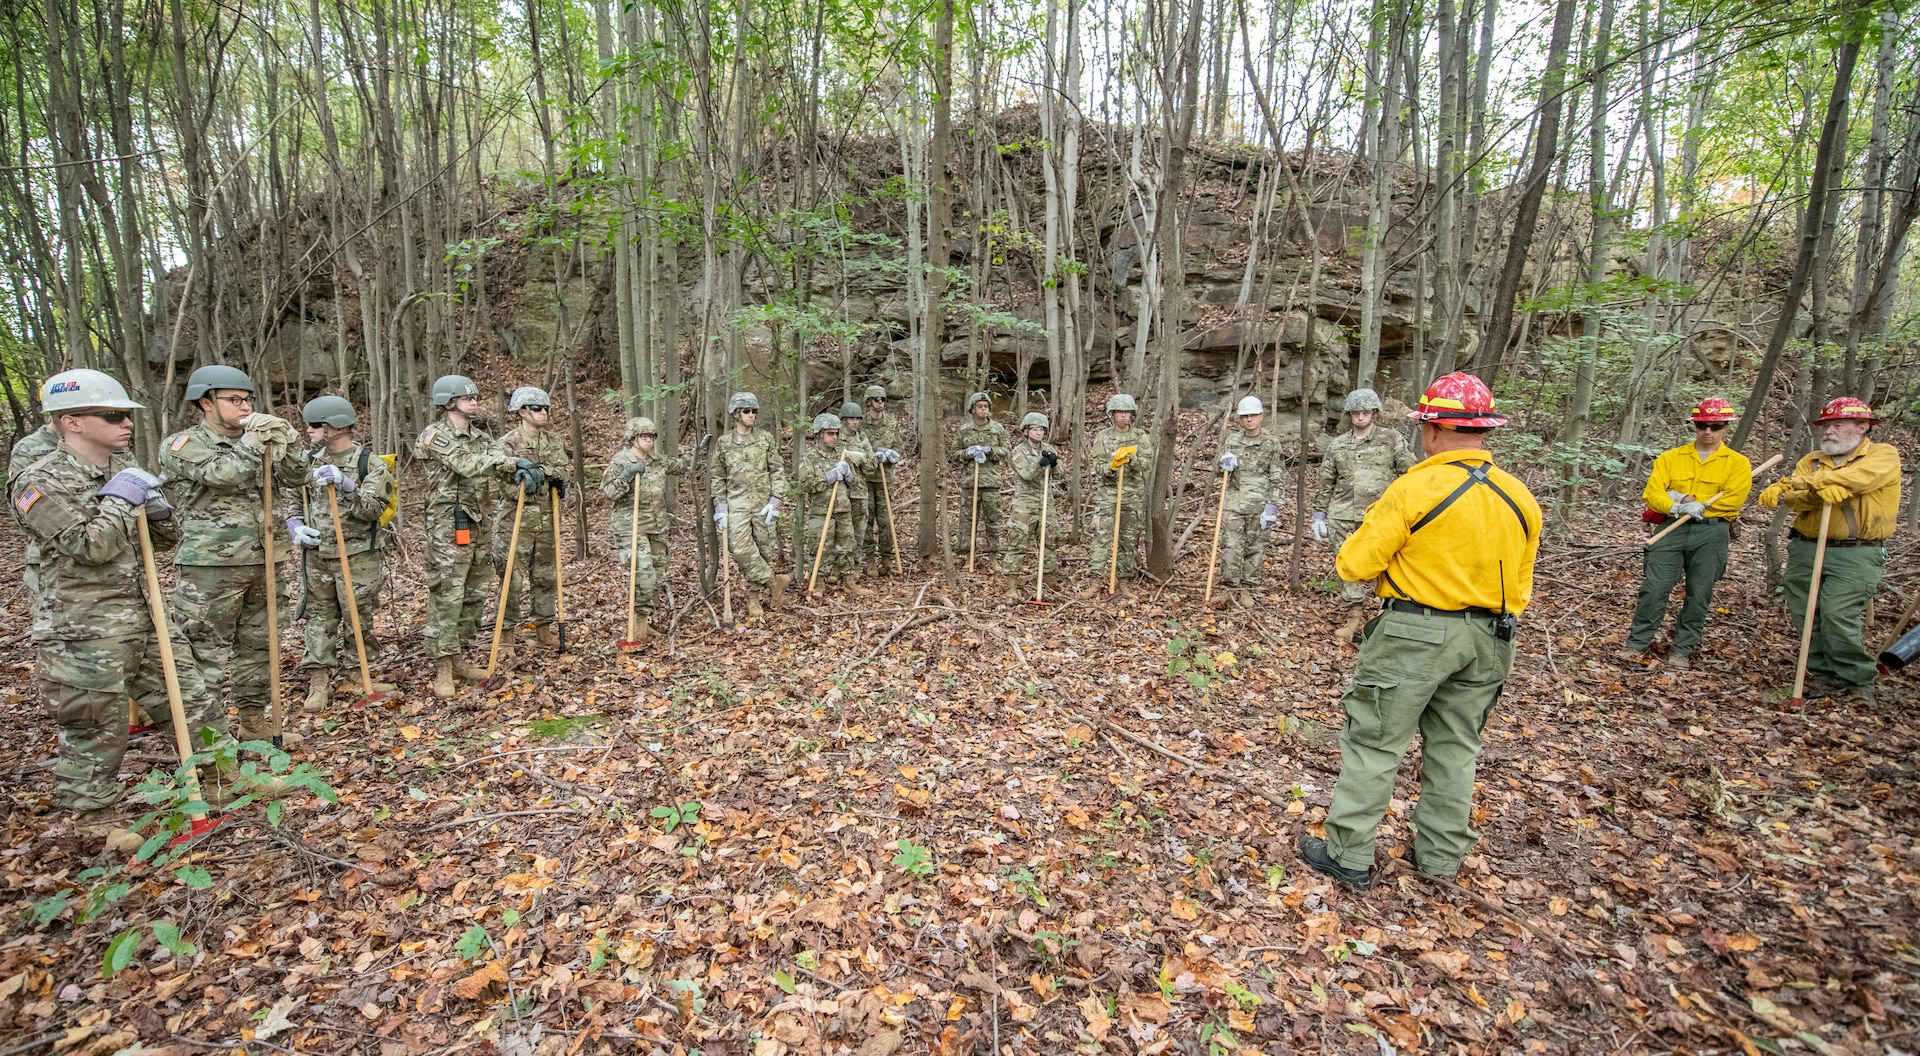 Members of the West Virginia Army National Guard’s 249th Army Band participate in basic wildland fire suppression training, conducted by the West Virginia Division of Forestry in Morgantown, West Virginia, Oct. 3, 2019. The training covered basic wildland fire fighting techniques including understanding fire behavior, suppression tactics and techniques, crew organization, communications, and crew safety and awareness, with the goal of providing WNVG Soldiers the basic skills and experience to operate on a fire line side-by-side with experienced Division of Forestry personnel. (U.S. Army National Guard photo by Edwin L. Wriston)